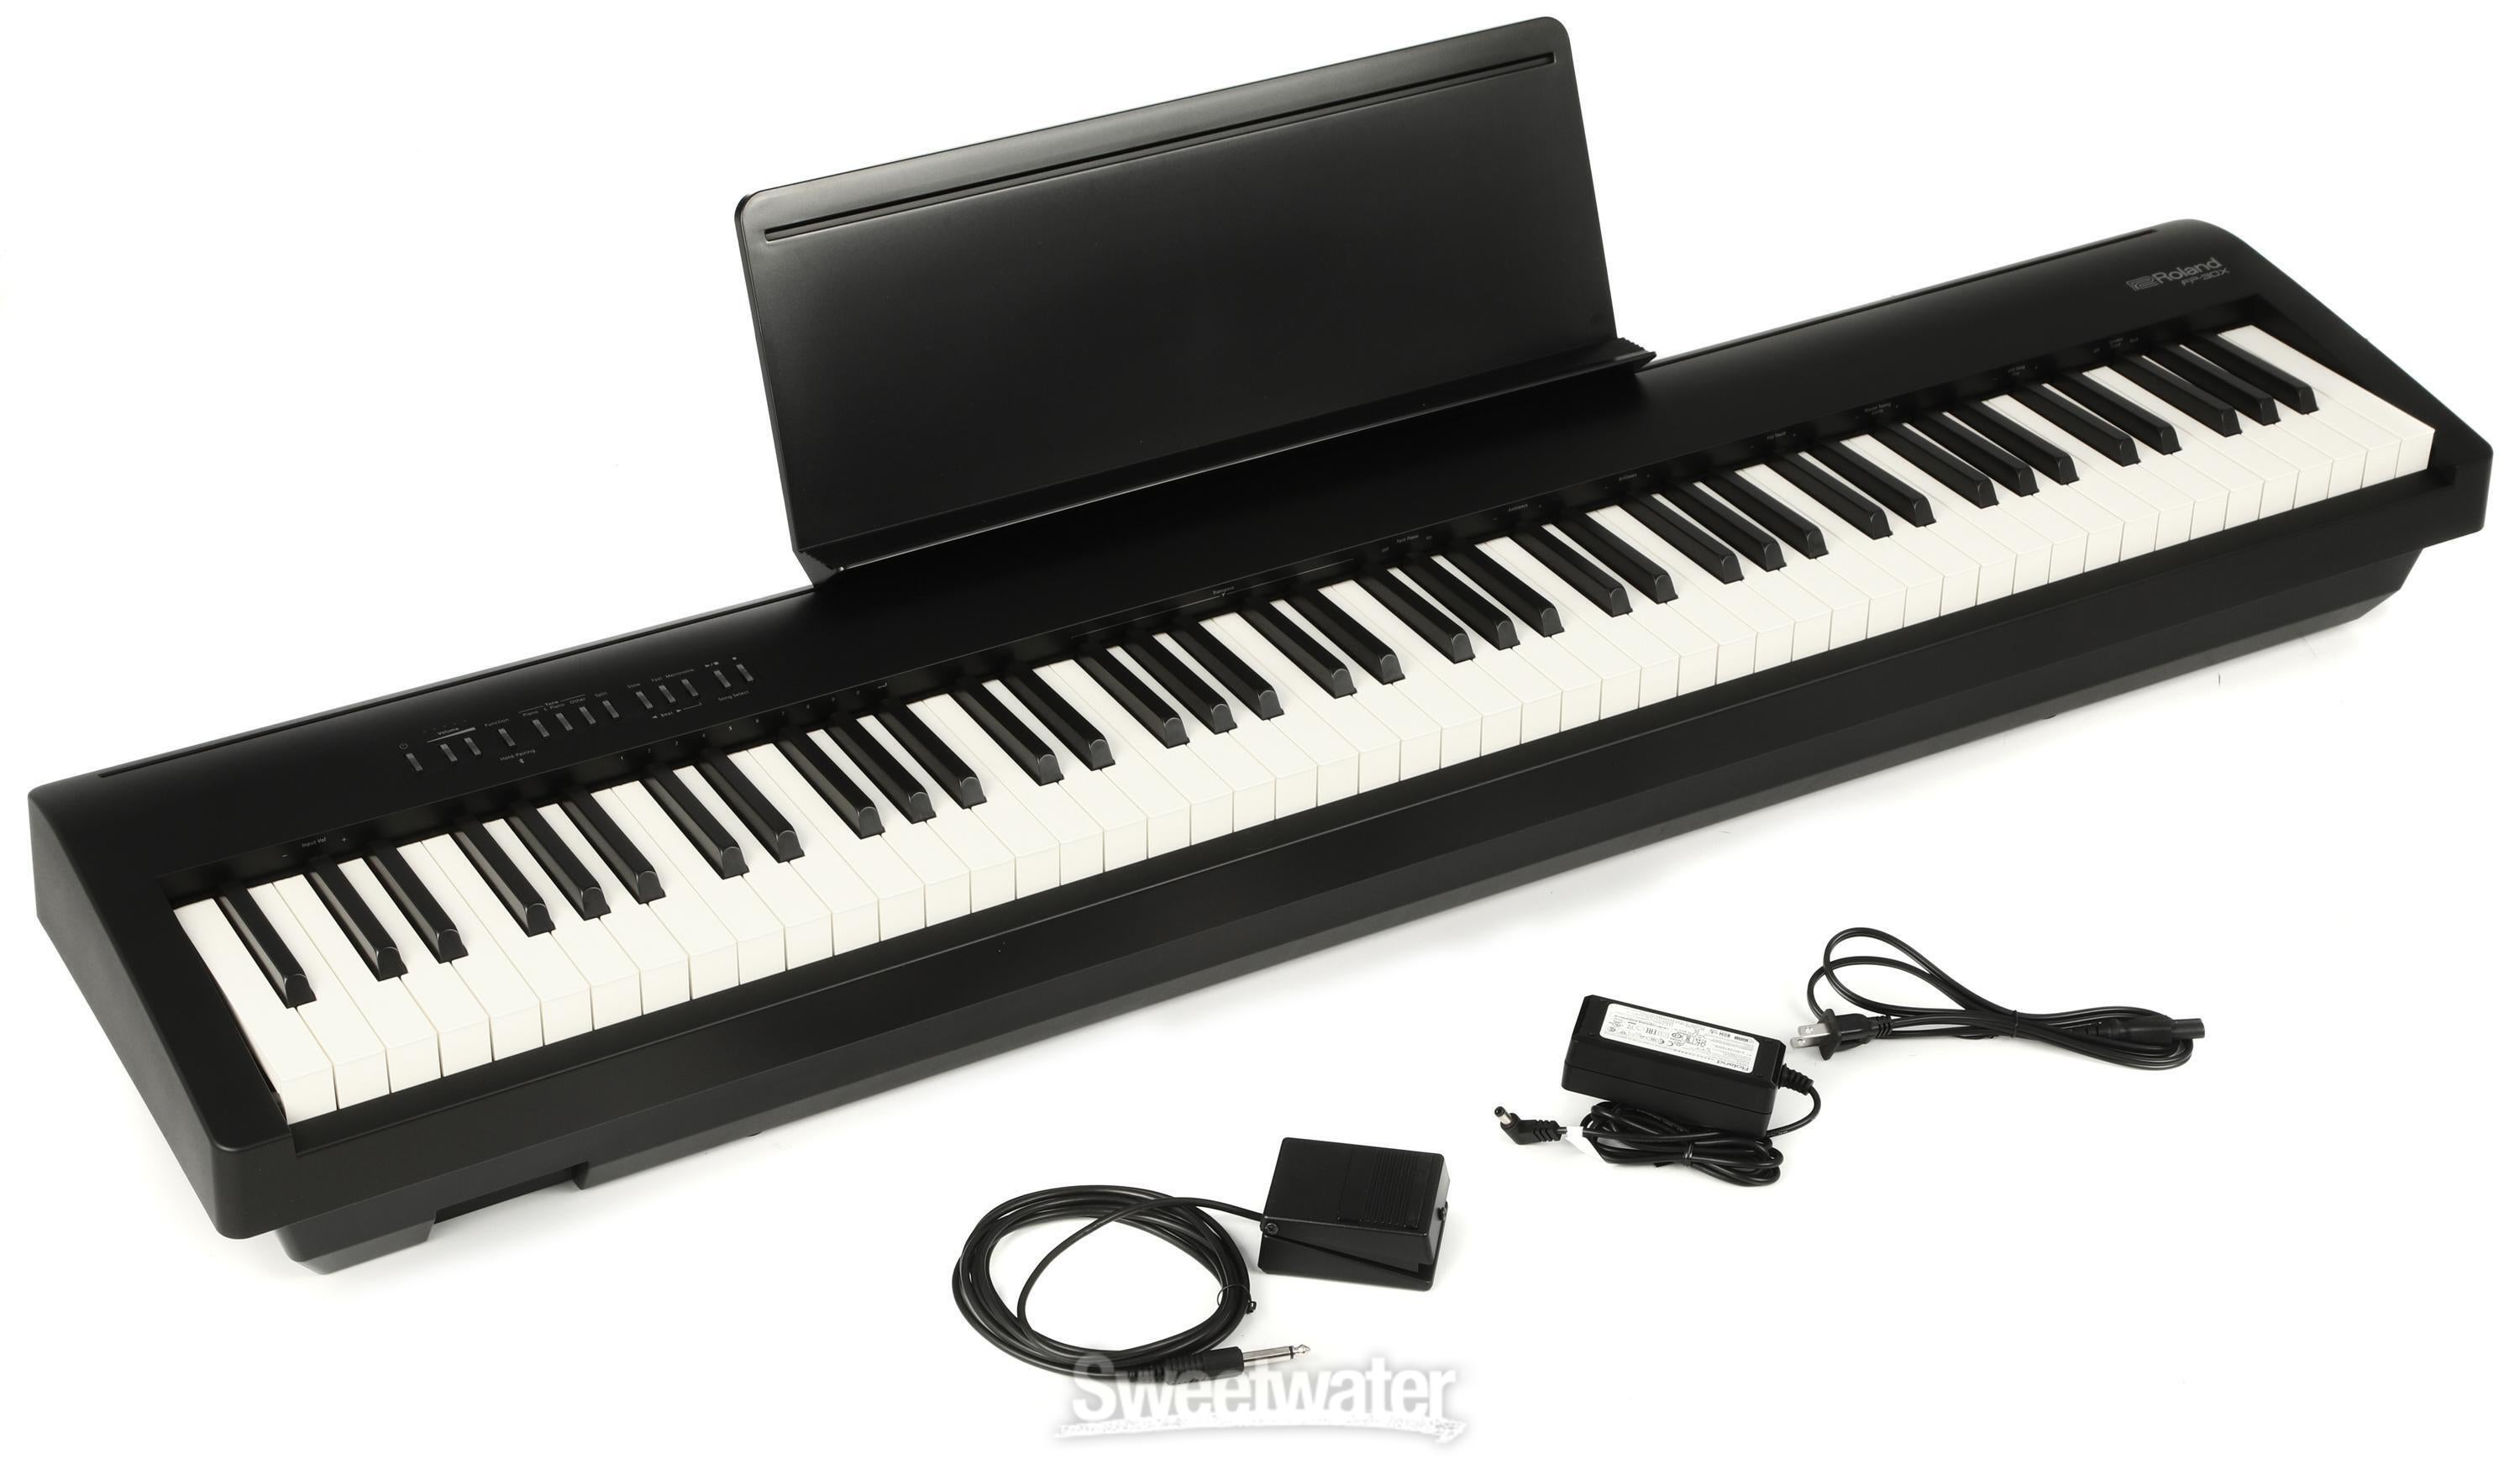 Roland FP-30X Digital Piano with Speakers - Black | Sweetwater